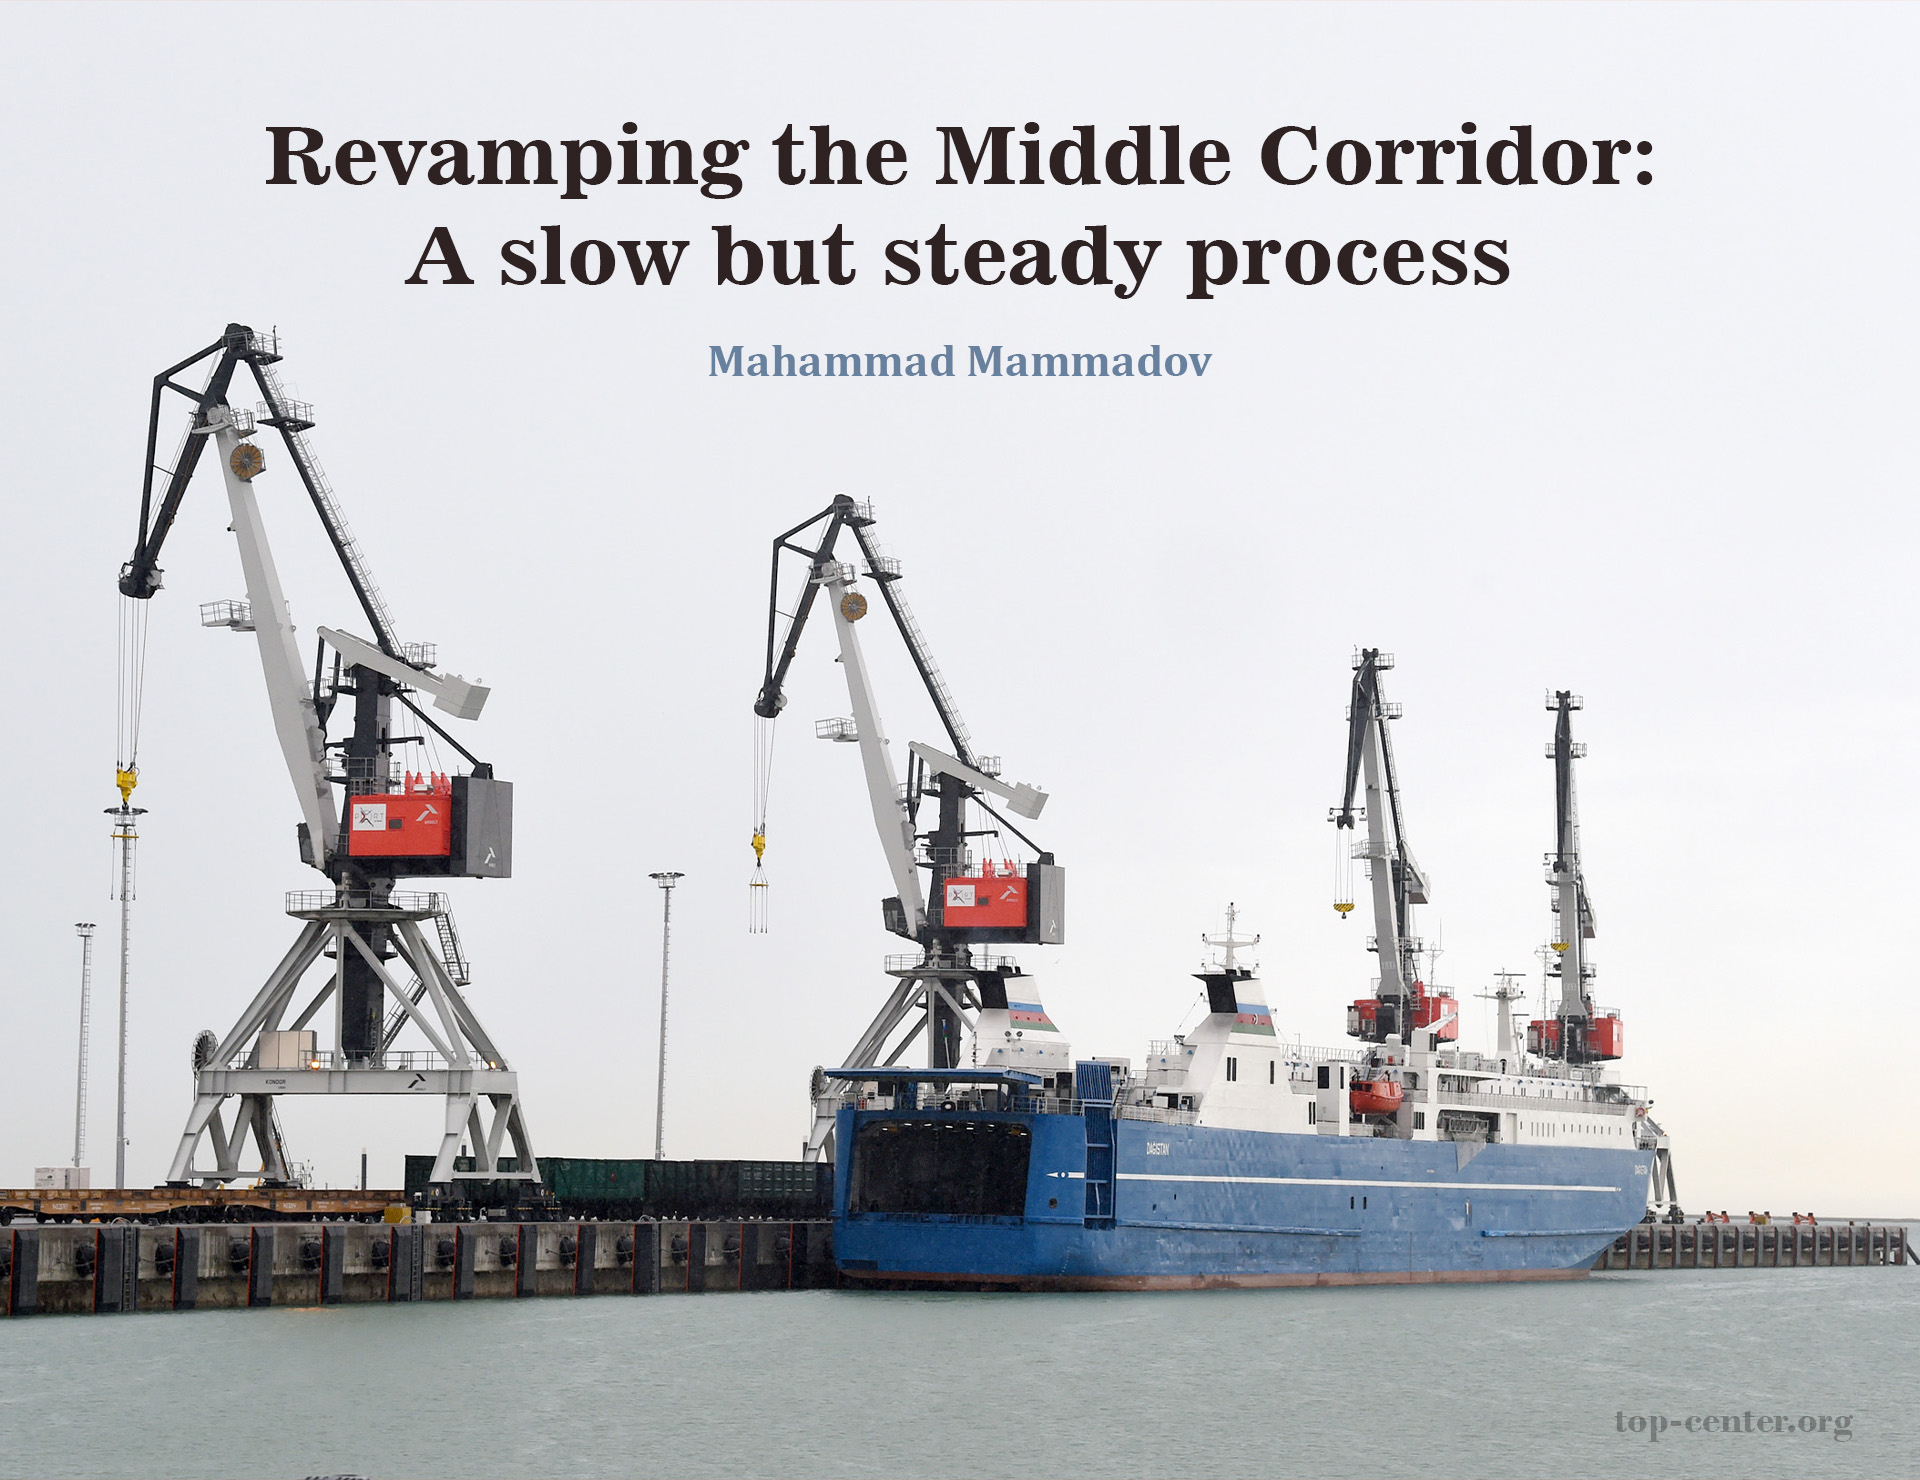 Revamping the Middle Corridor: A slow but steady process